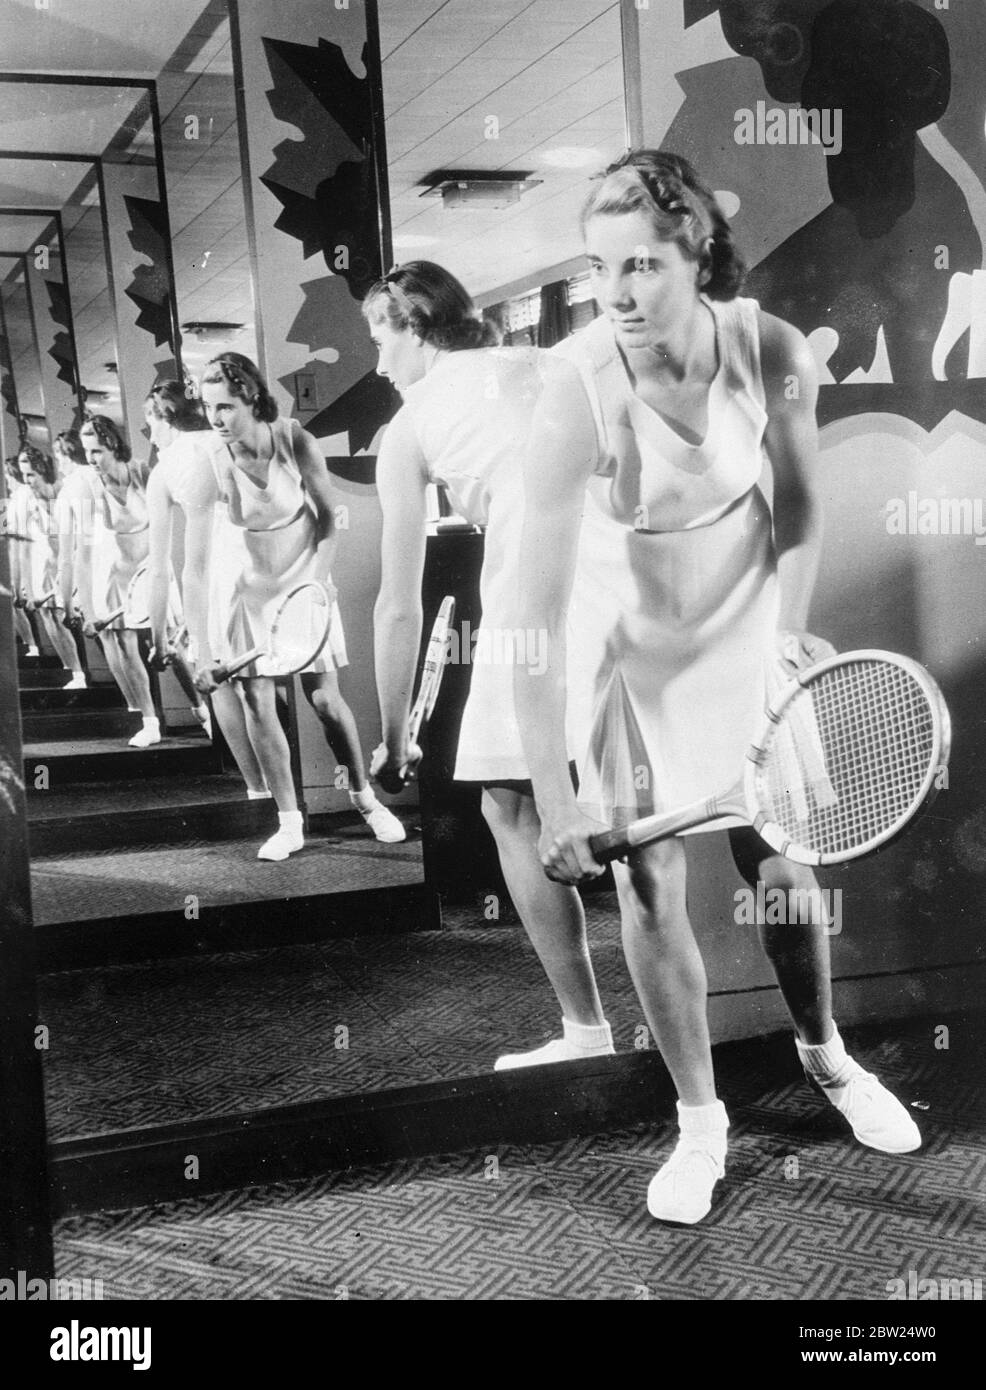 Kay Stammers designs own tennis dress. Kay Stammers, the attractive British tennis player, uses a series of mirrors to display a new tennis dress she designed herself in New York. The dress of white linen edged with pink. 5 September 1938 Stock Photo